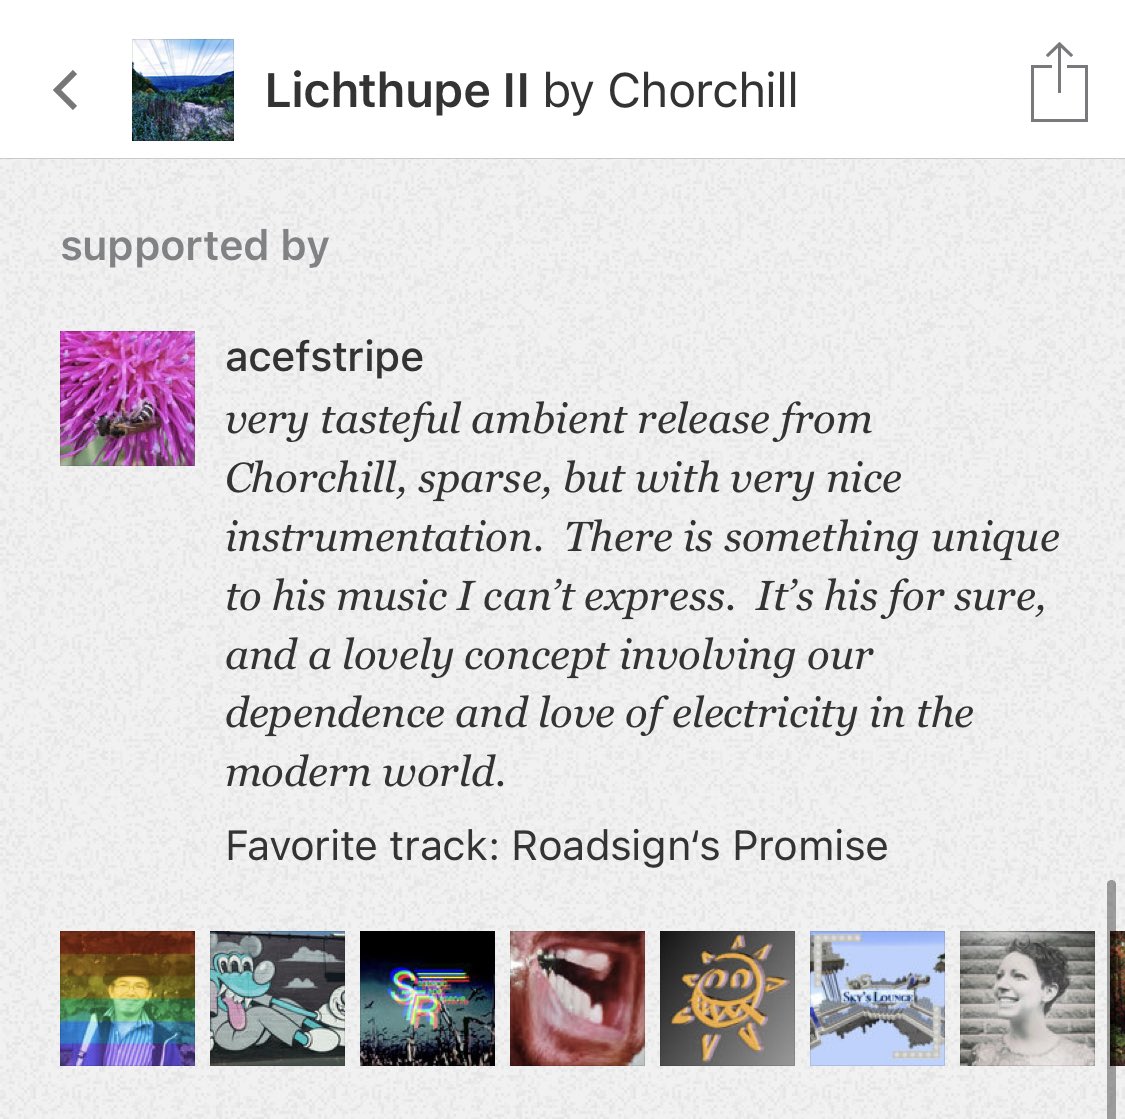 If you like rhythmical ambient music with positive instrumentation, you’ll love  @chorchillmusic’s meditations on lights and electricity.His Lichthupe was released last year but its sequel, Lichthupe II, is our newest act, released only two days ago. https://binaural-space.bandcamp.com/album/lichthupe-ii